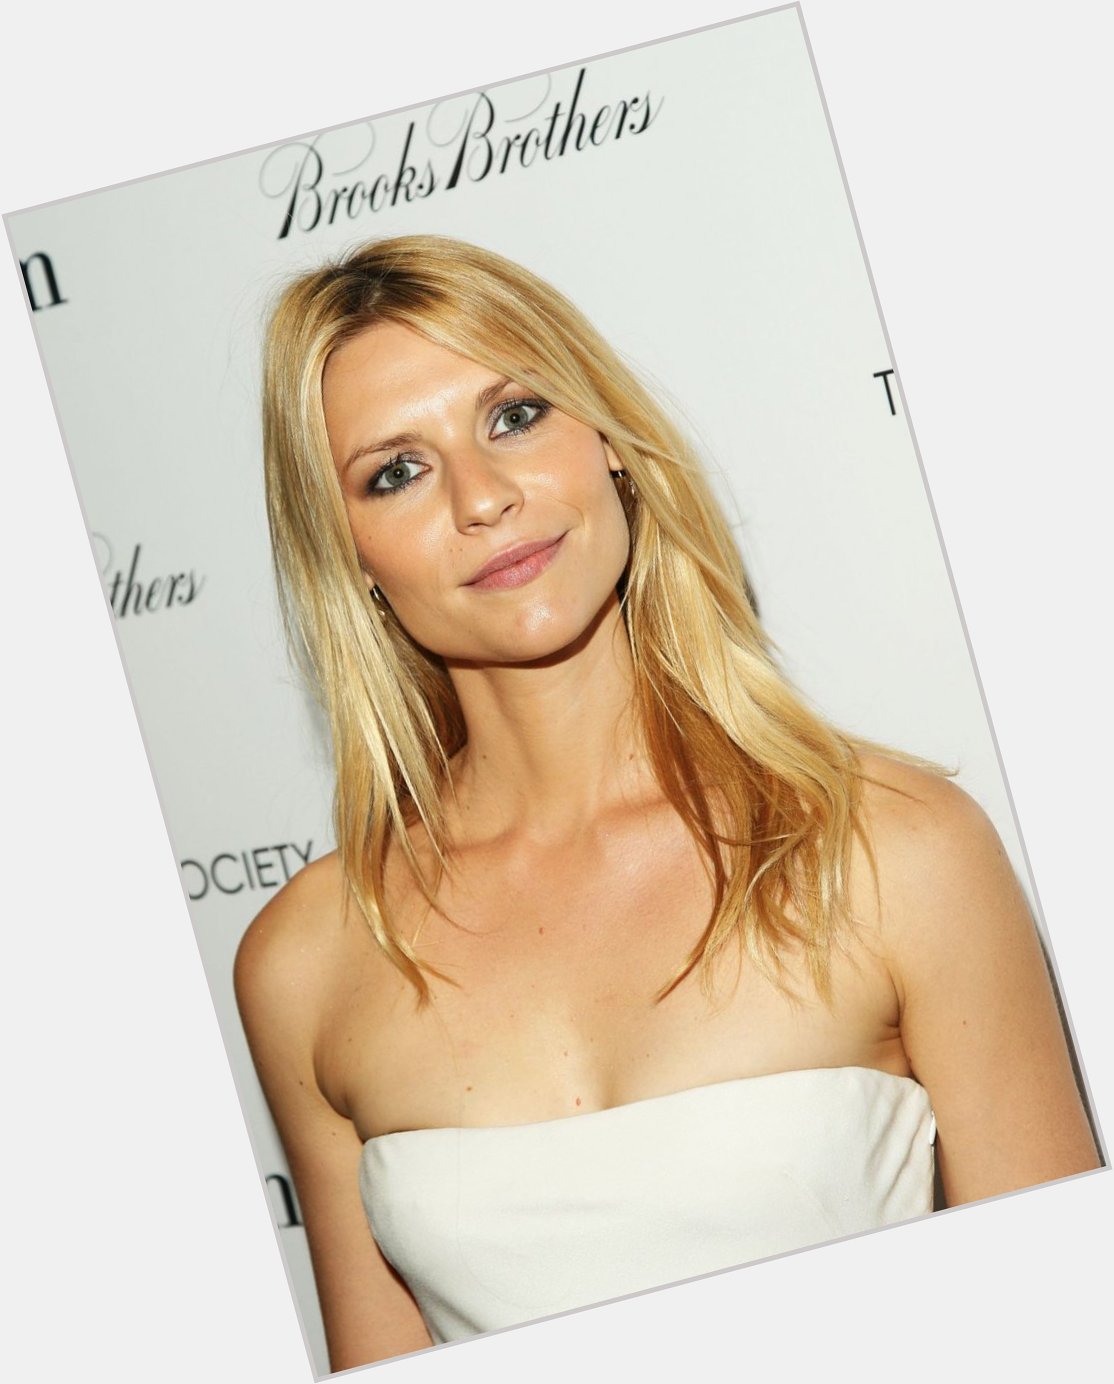 Happy Birthday to Claire Danes, who turns 38 today! 